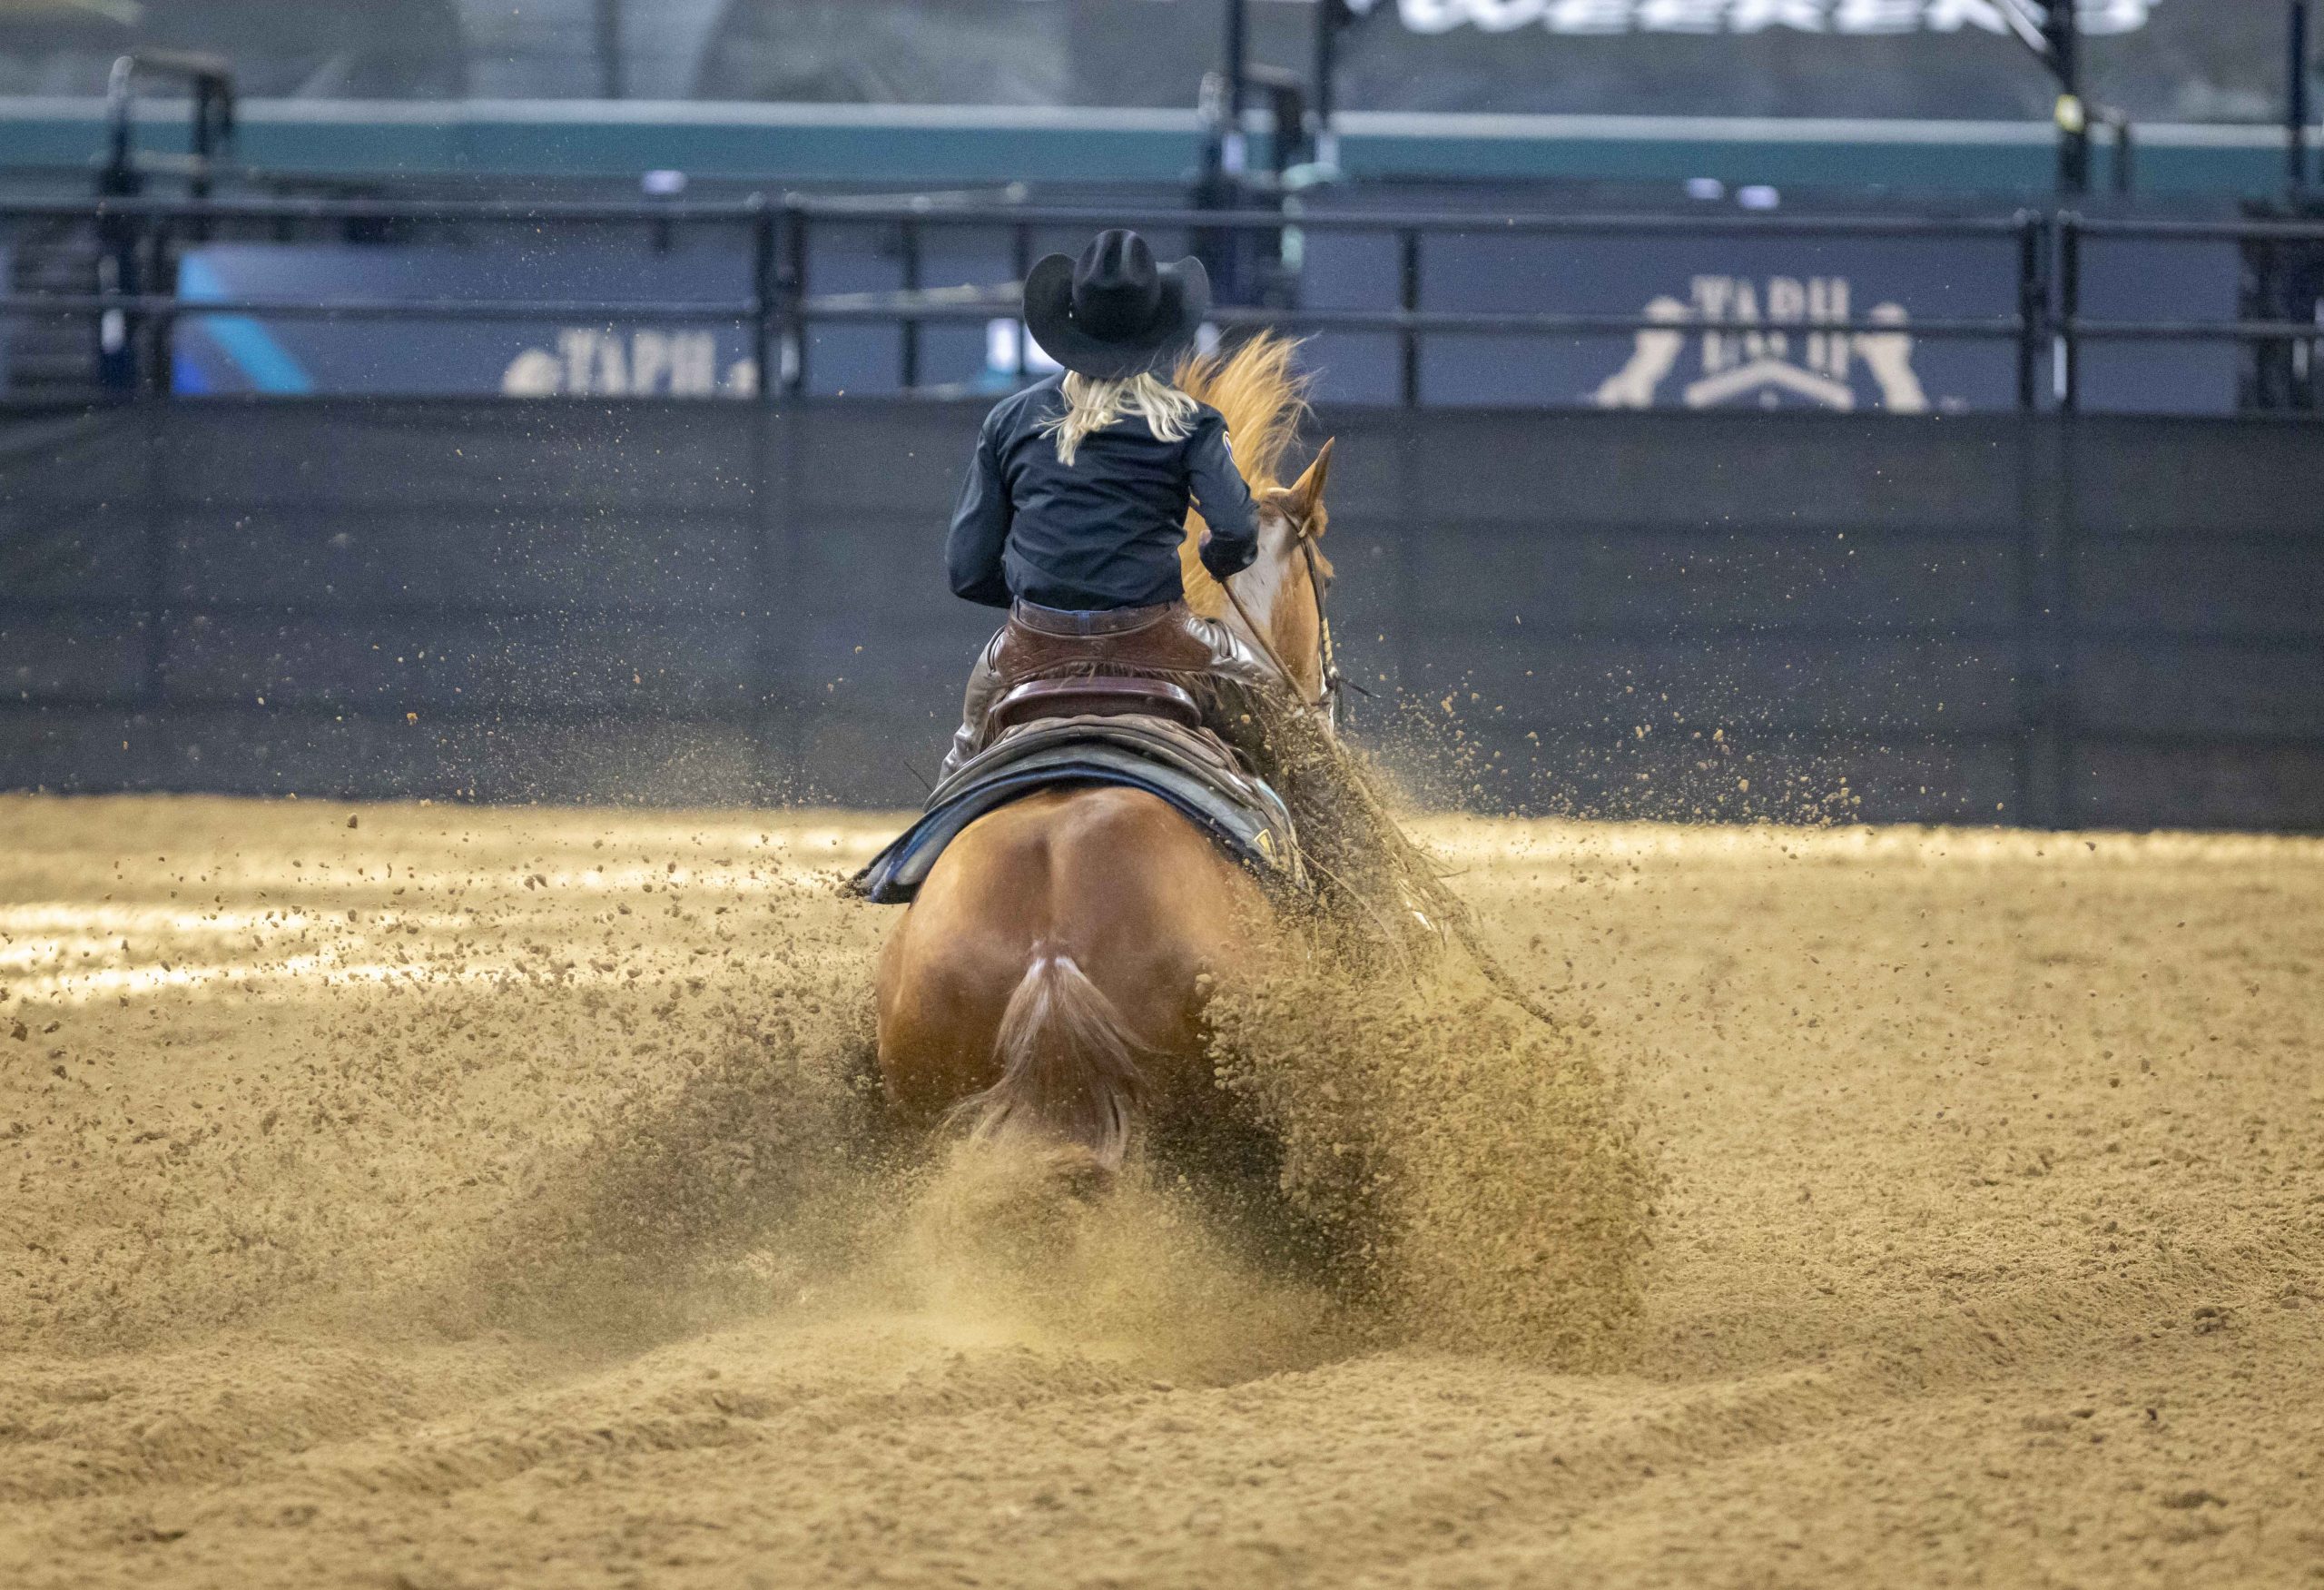 Sarah Dawson comes to a sliding stop with her equine partner at the Globe Life Field arena.